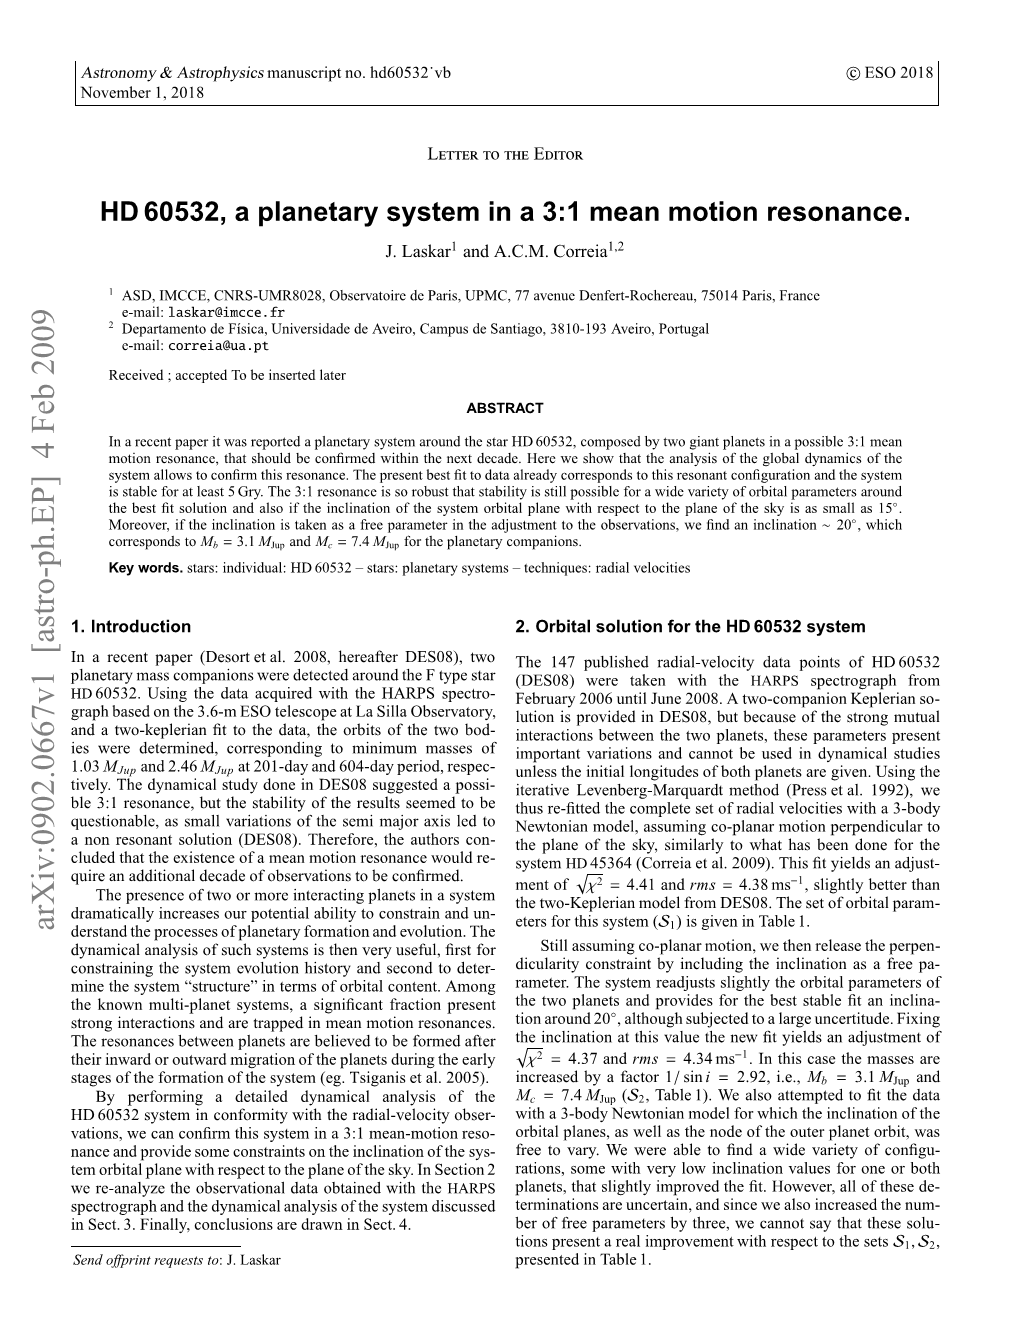 HD60532, a Planetary System in a 3: 1 Mean Motion Resonance